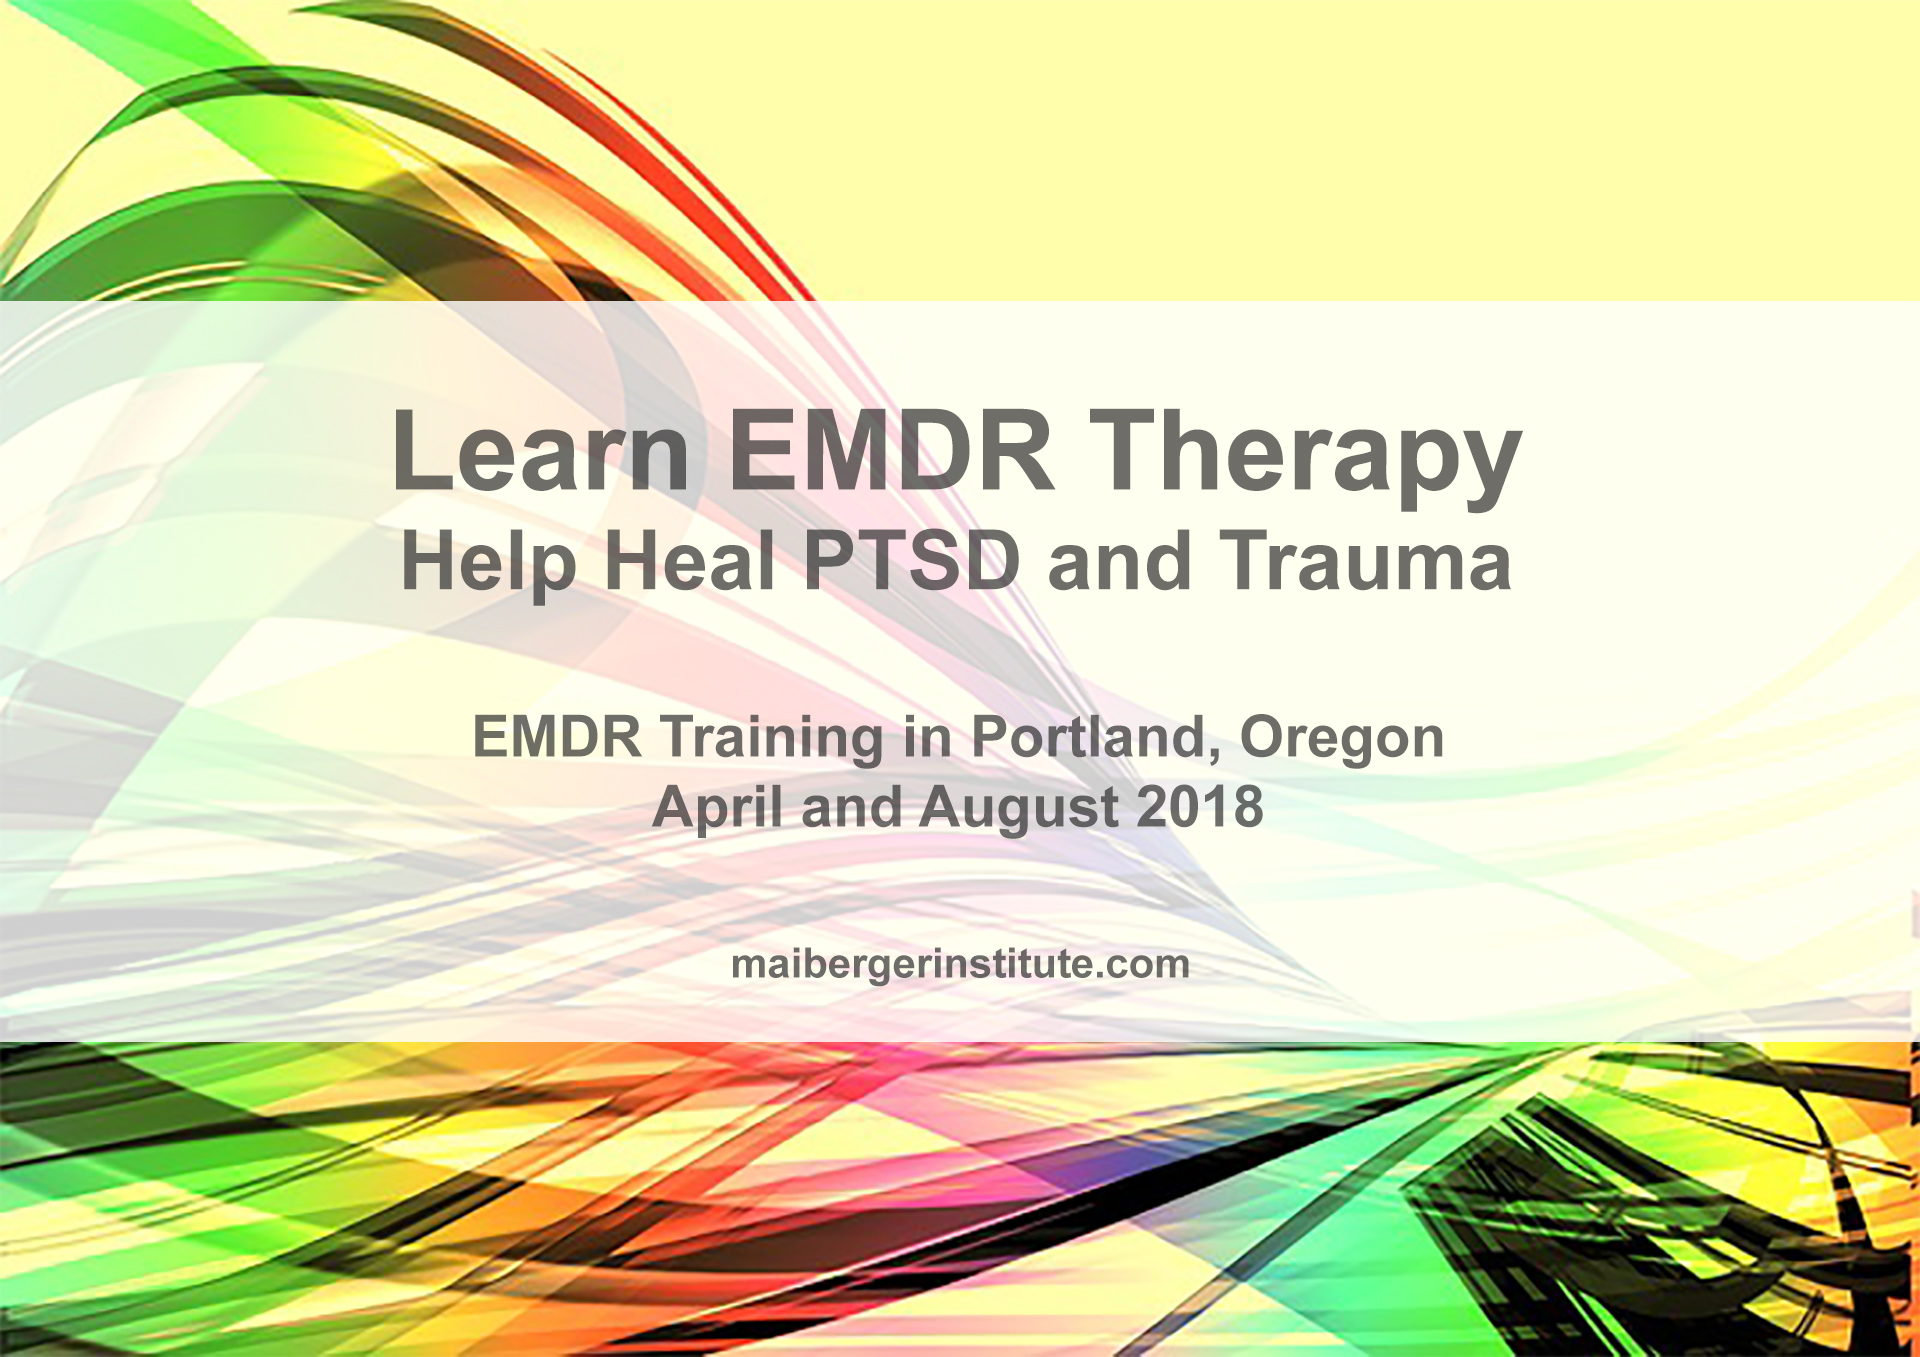 EMDR Training in Portland, Oregon - April and August 2018 - Learn EMDR Therapy To Help Heal PTSD and Trauma